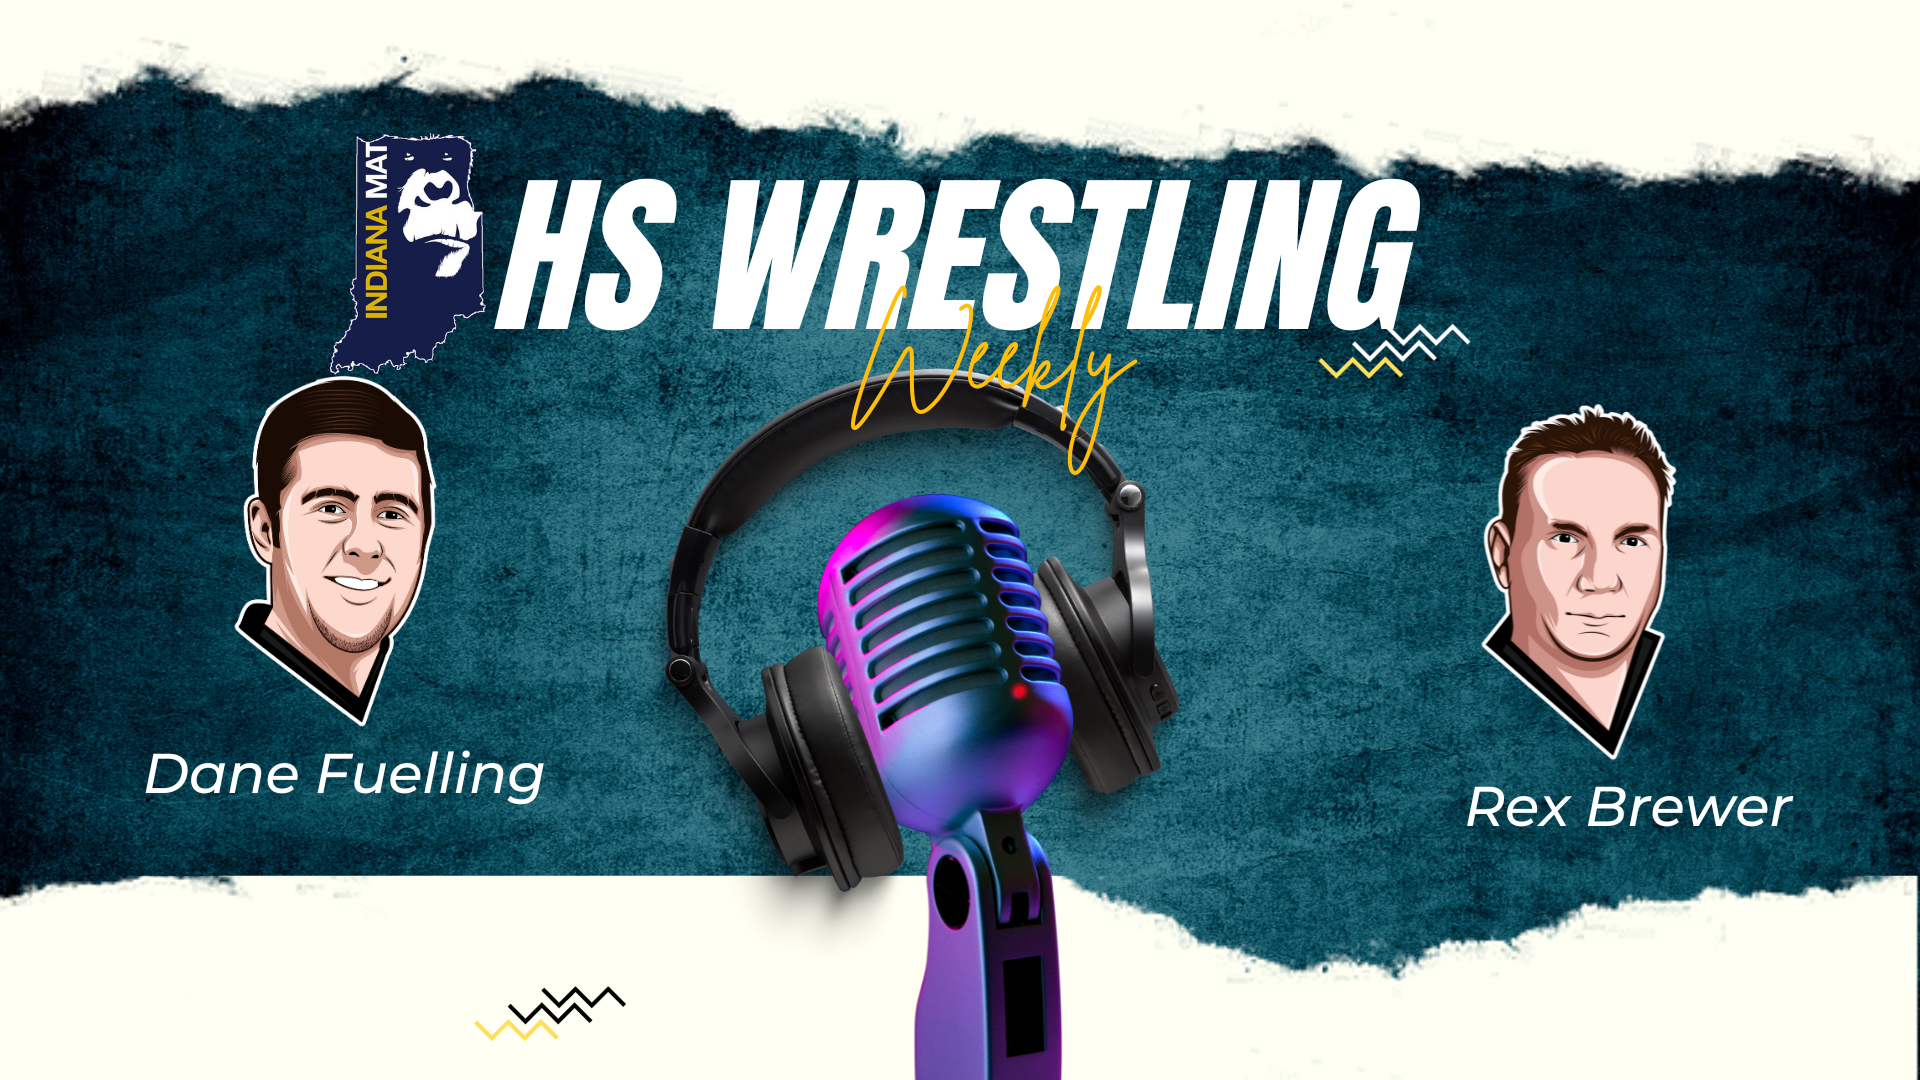 More information about "HS Wrestling Weekly Season 5 Episode 11"